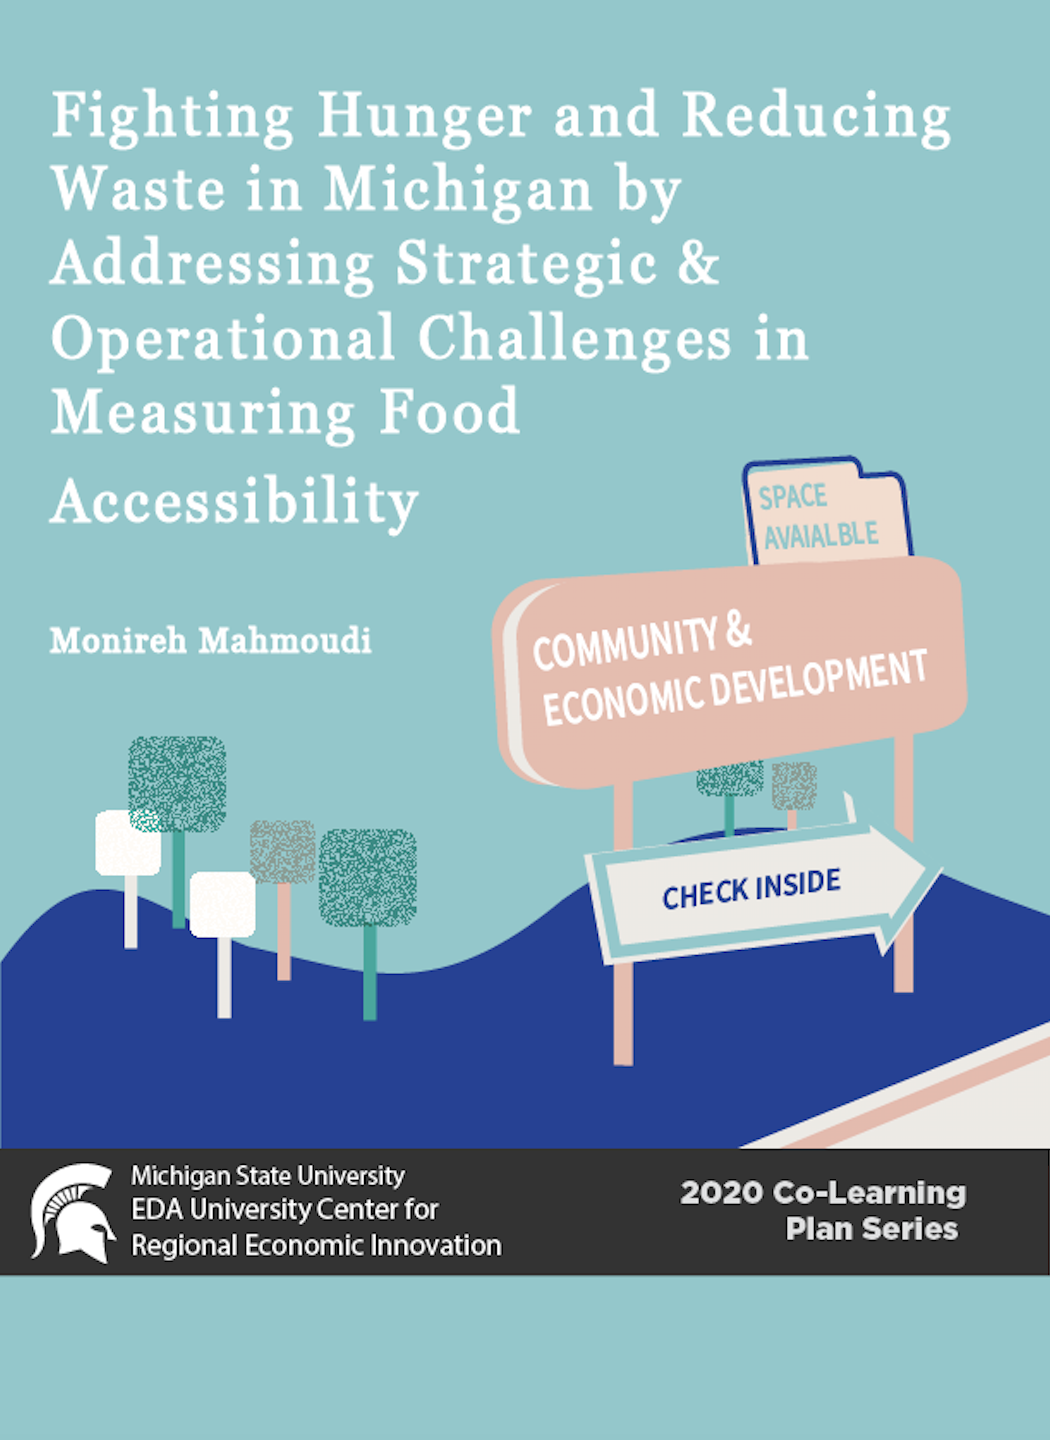 Fighting Hunger and Reducing Waste in Michigan by Addressing Strategic and Operational Challenges in Measuring Food Accessibility (2020) Report